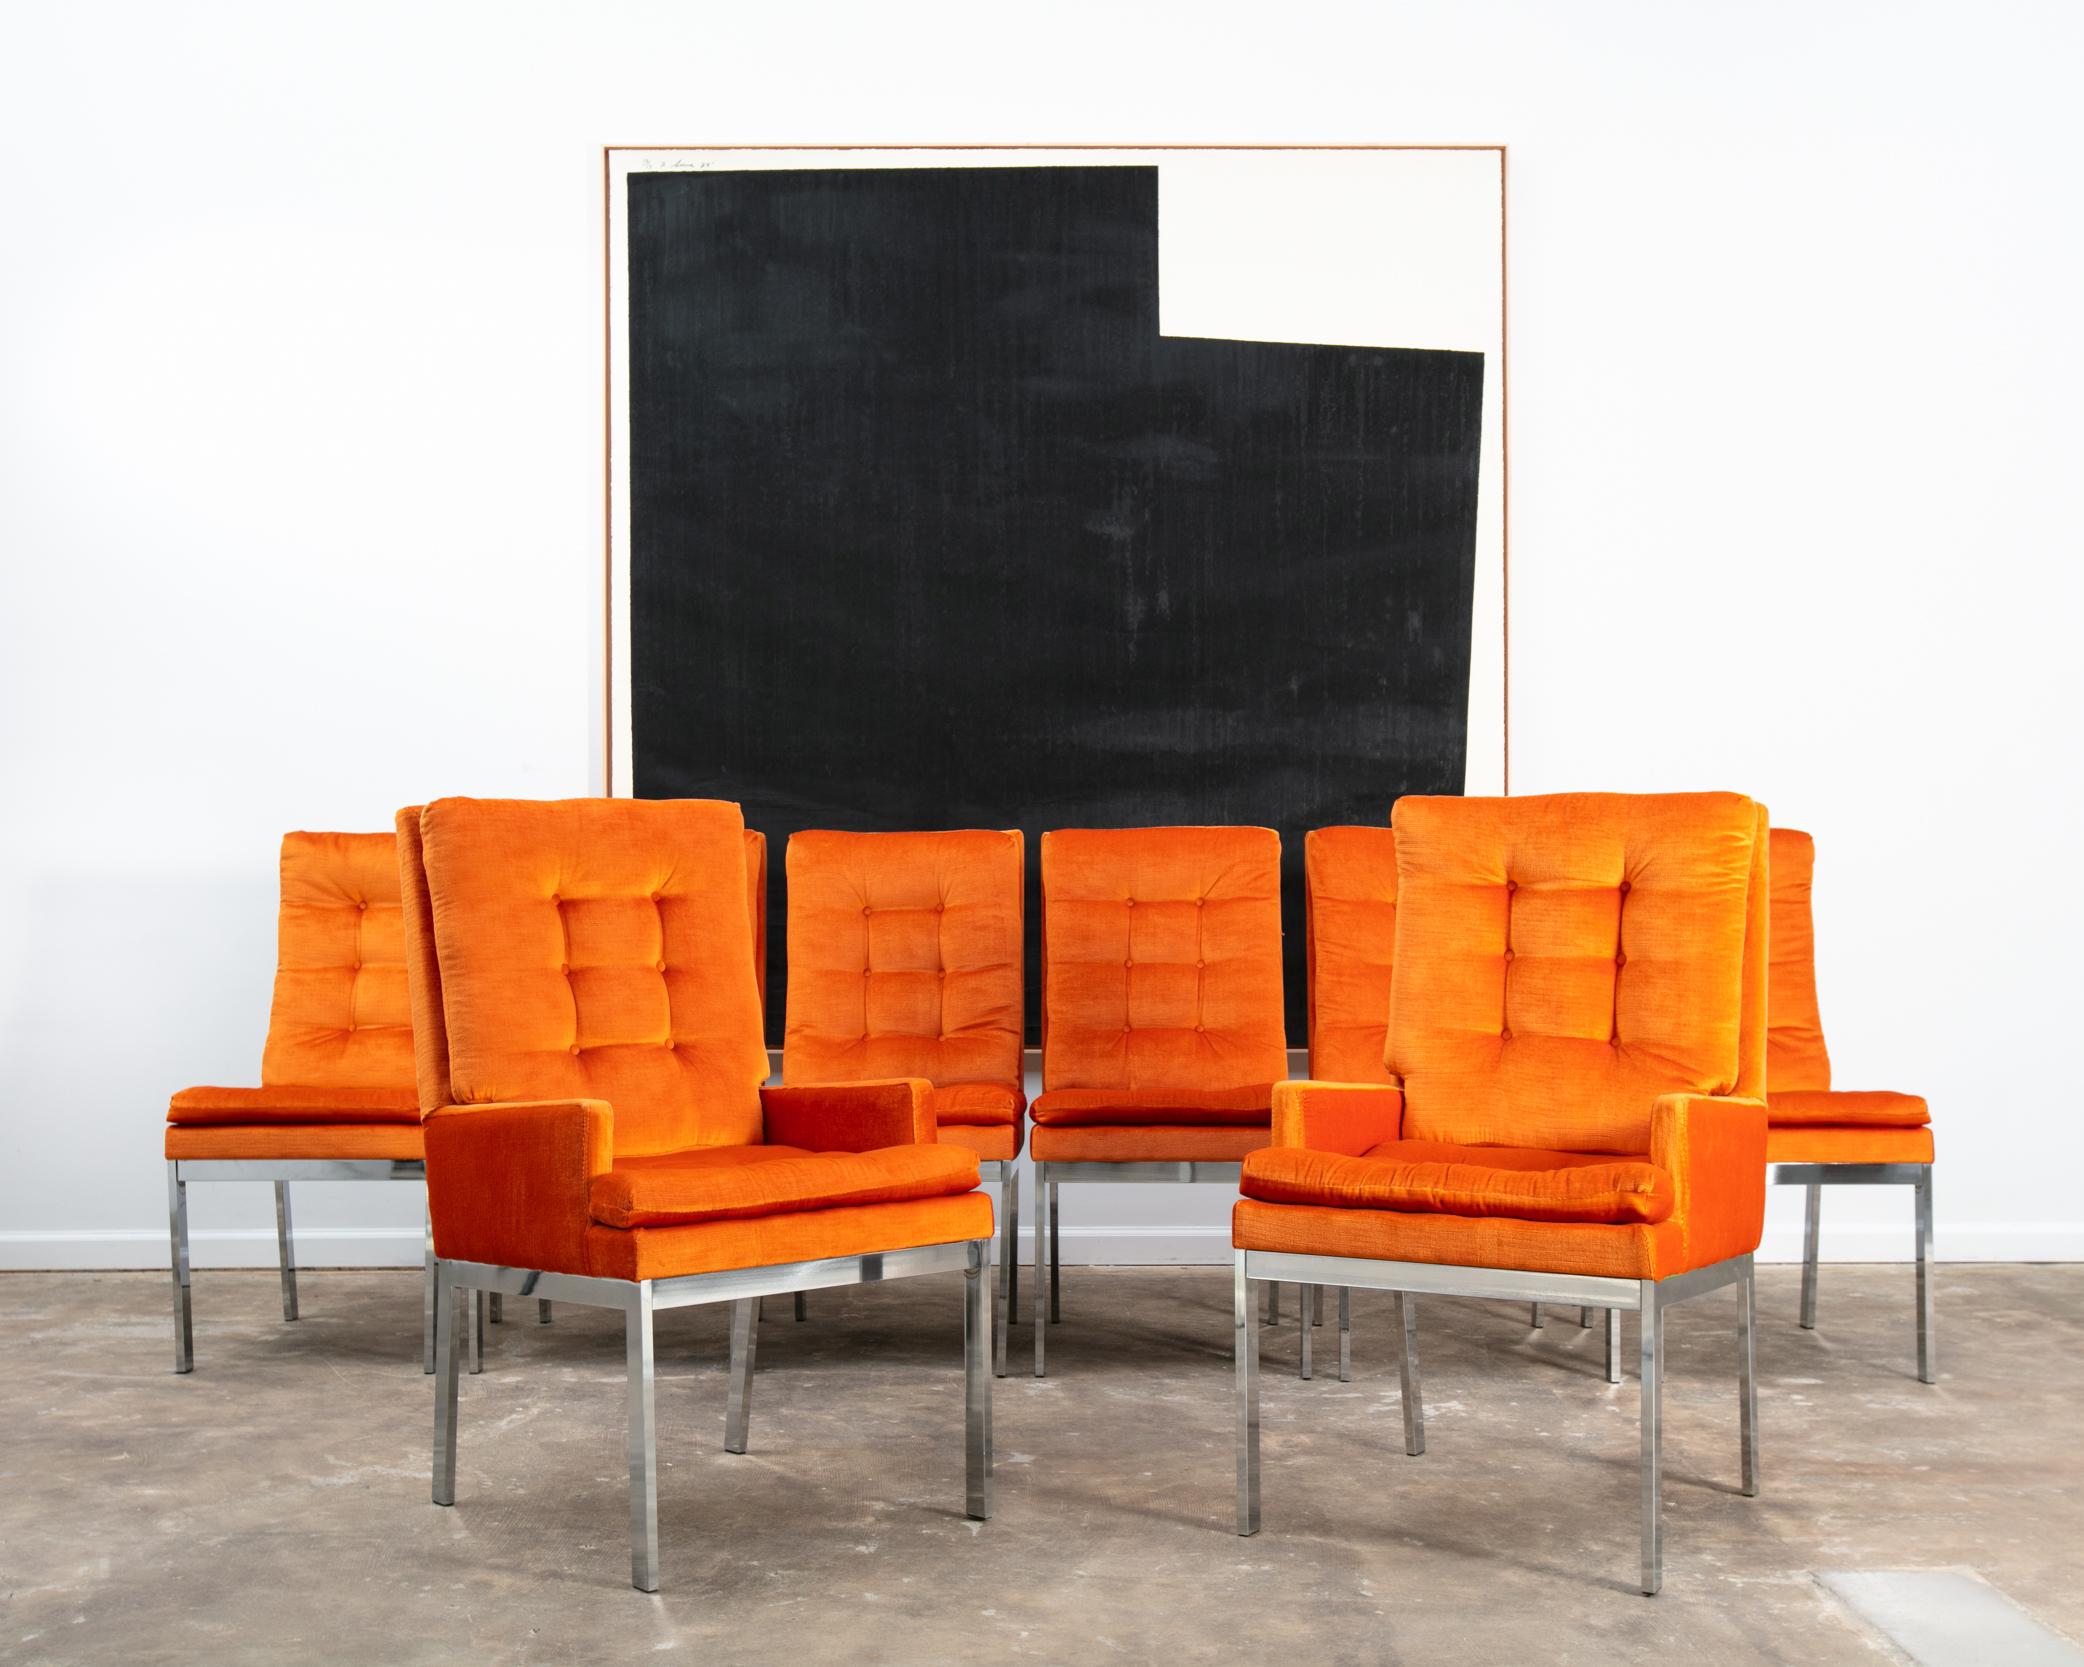 A set of 8 Midcentury orange velvet upholstered dining chairs with chrome legs designed by Milo Baughman.